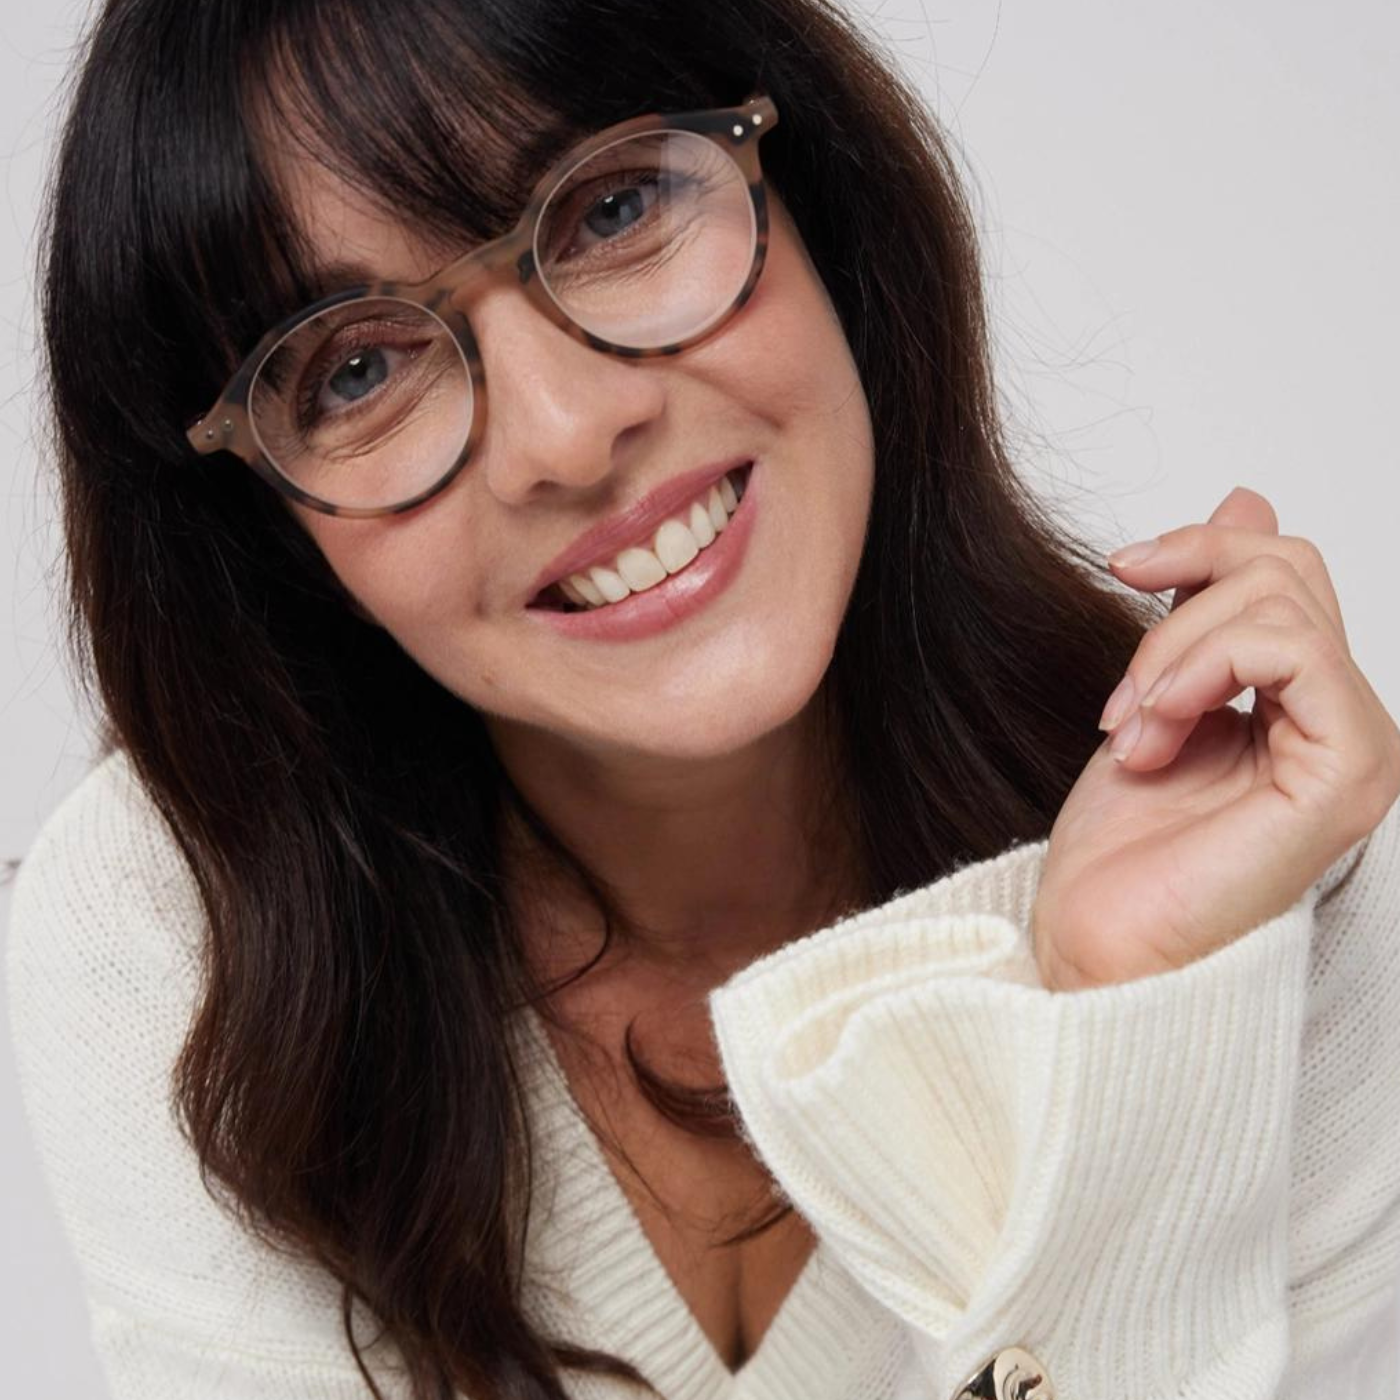 A female with brunette hair smiling, she is wearing the IZIPIZI Iconic Reading Glasses in the colour tortoiseshell.